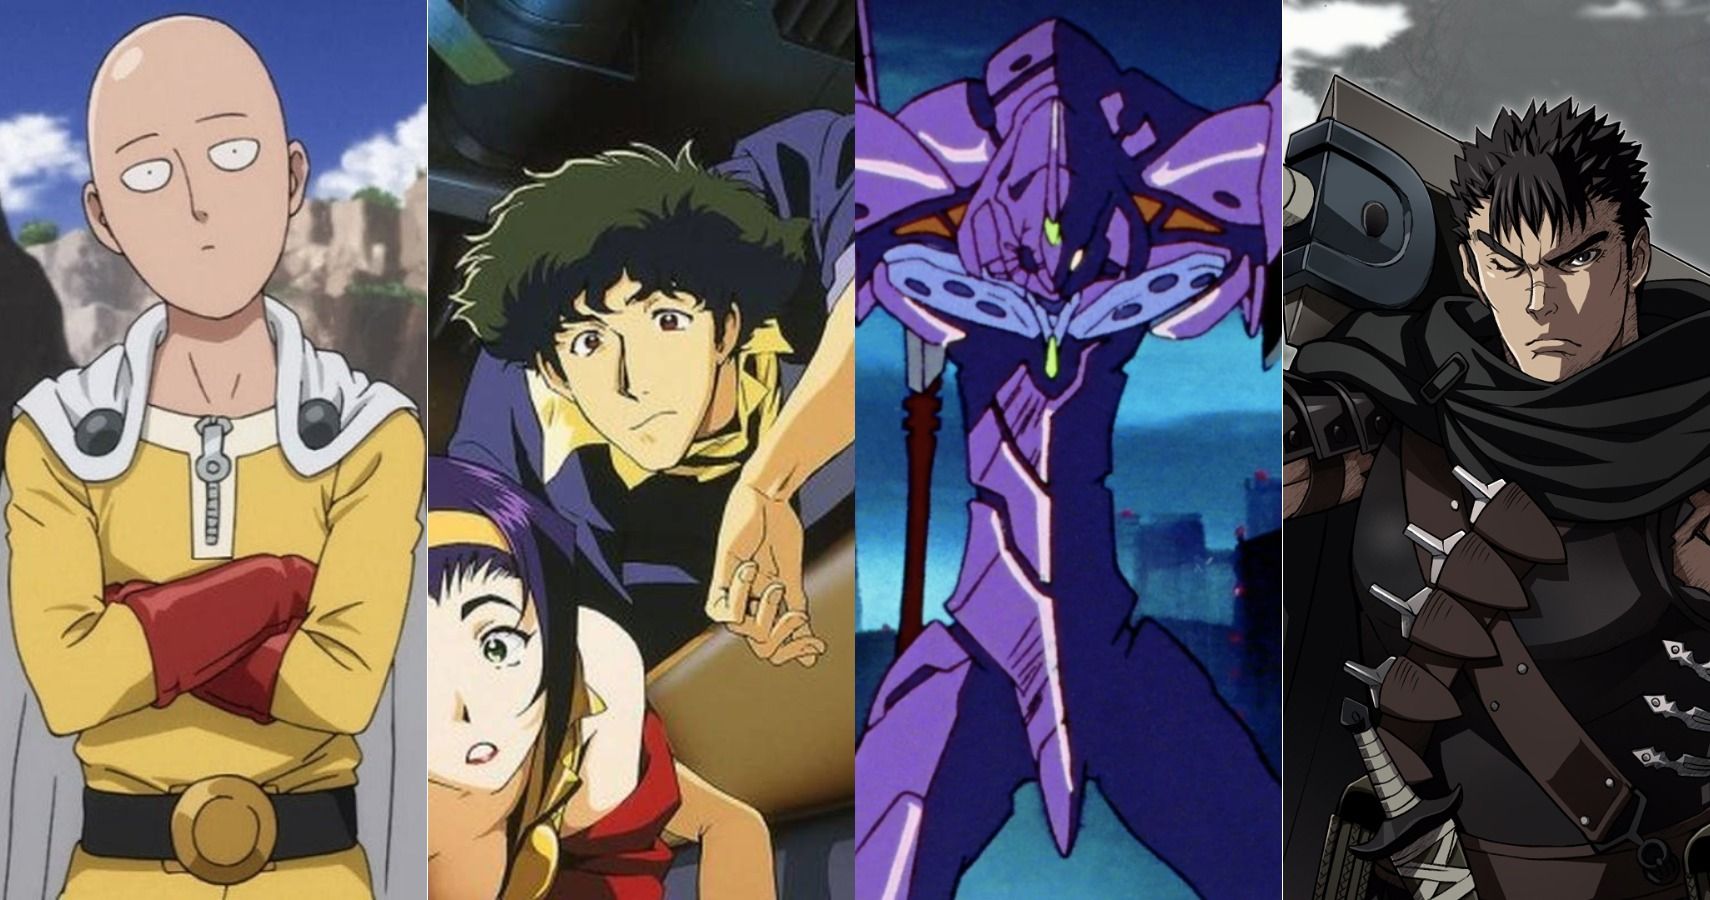 5 Anime That Have A Great Live-Action Adaptions (& 5 That Fell Flat)